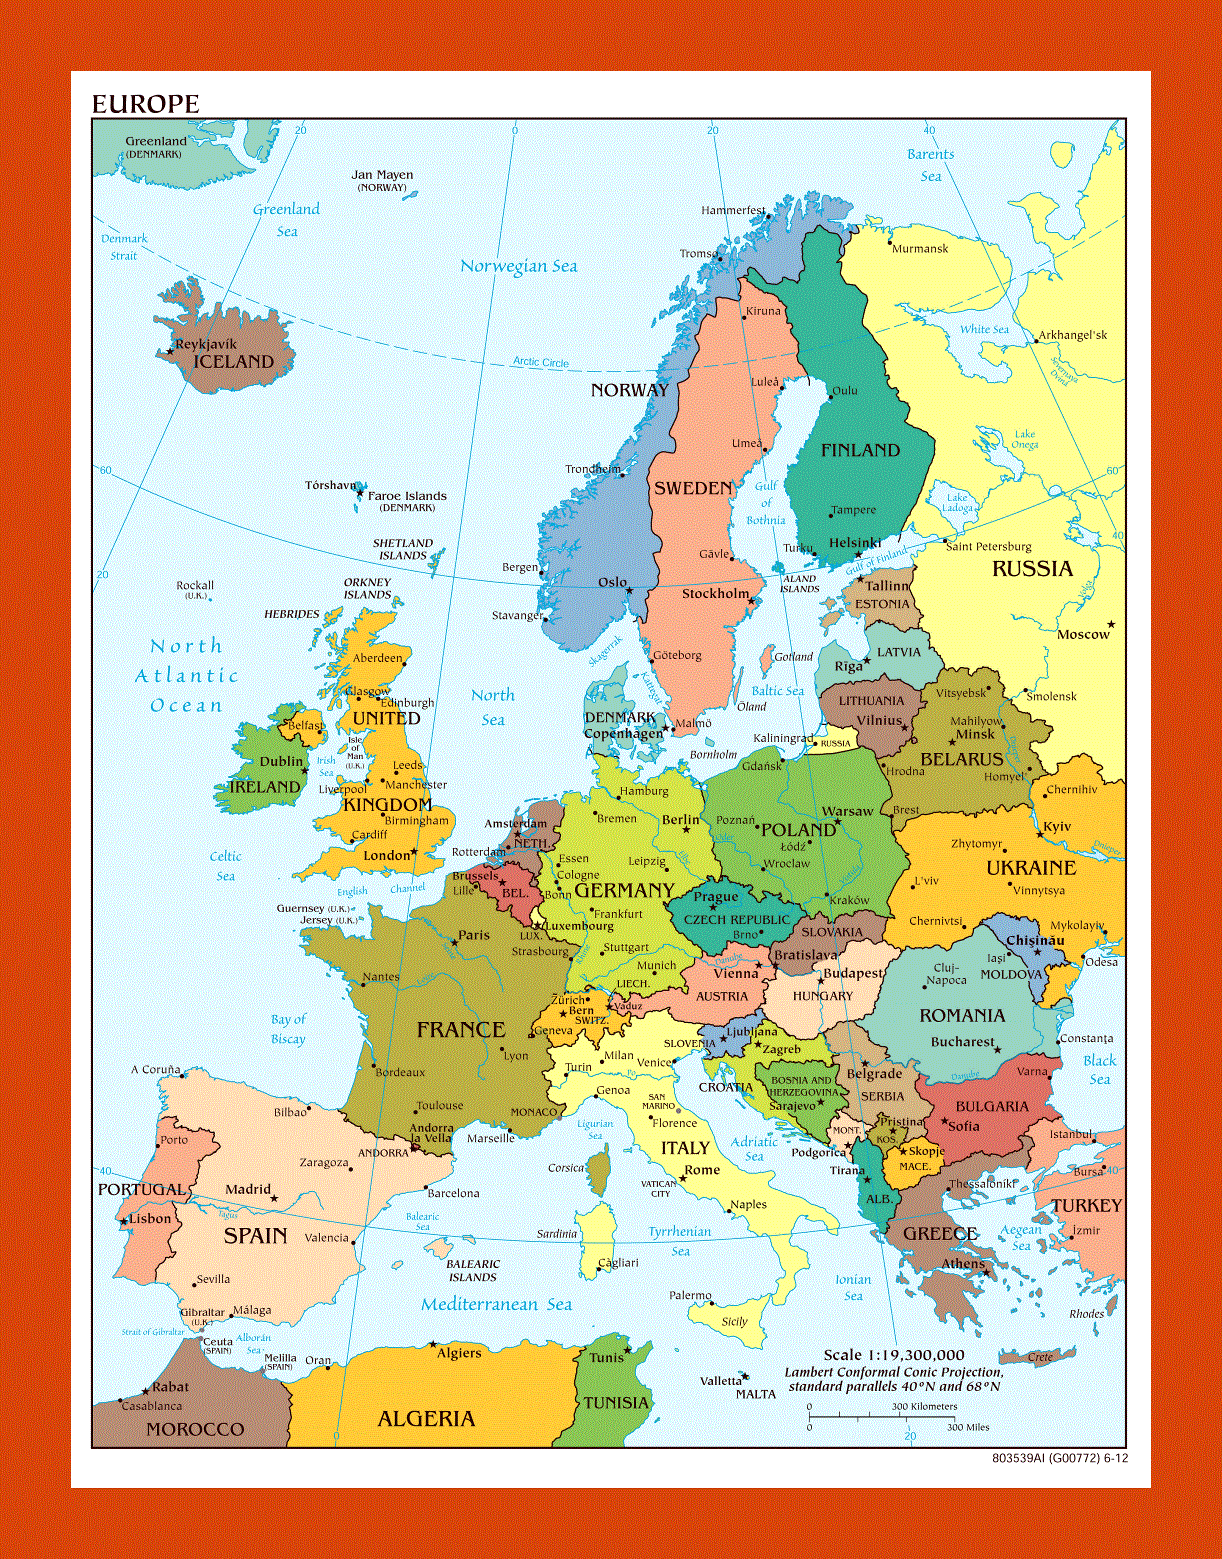 Political map of Europe - 2012